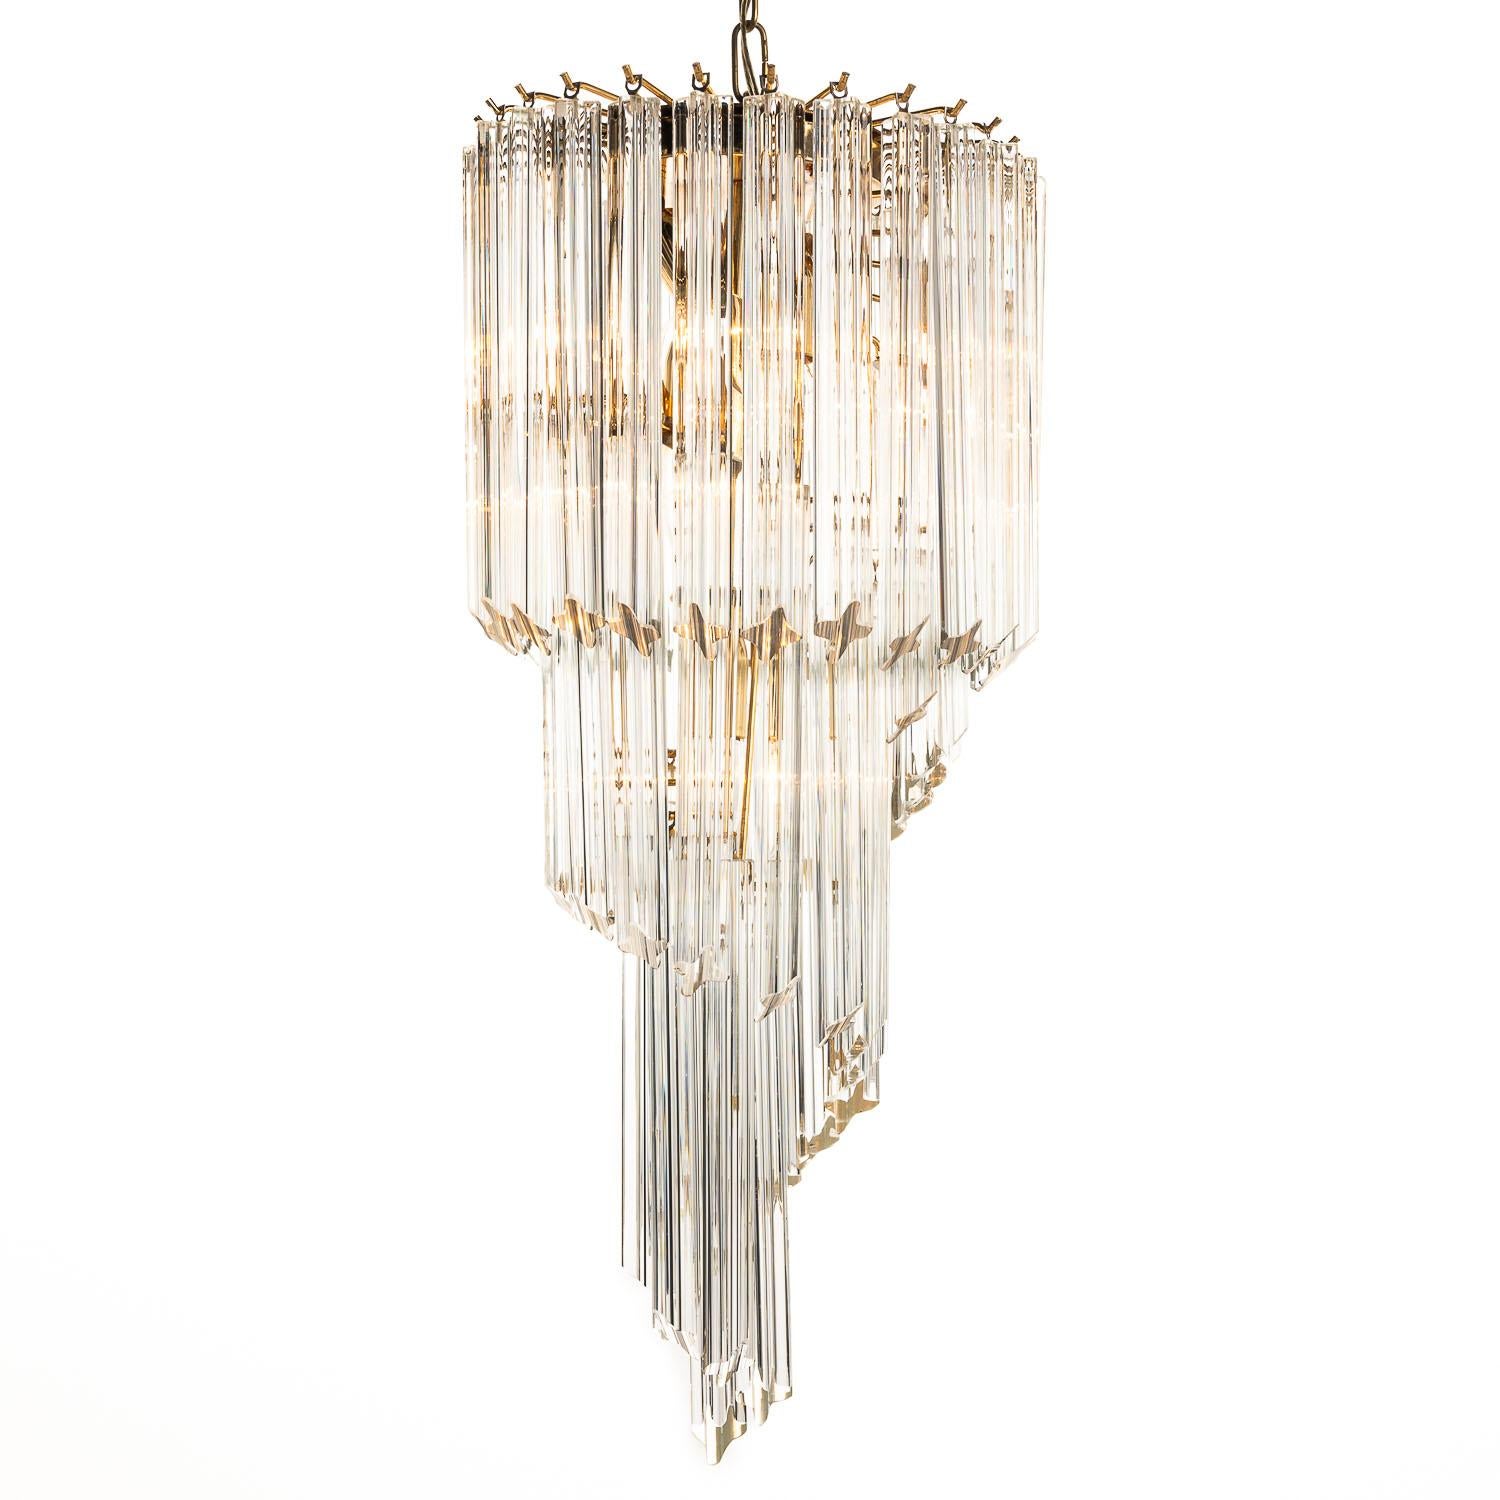 Looking for lighting that makes an impression? This is the one. From the practical, chunky chain and canopy, underneath we get to a spectacular arrangement of hanging crystal-glass cross-shaped tubes, formed into a mesmerising spiral to a single